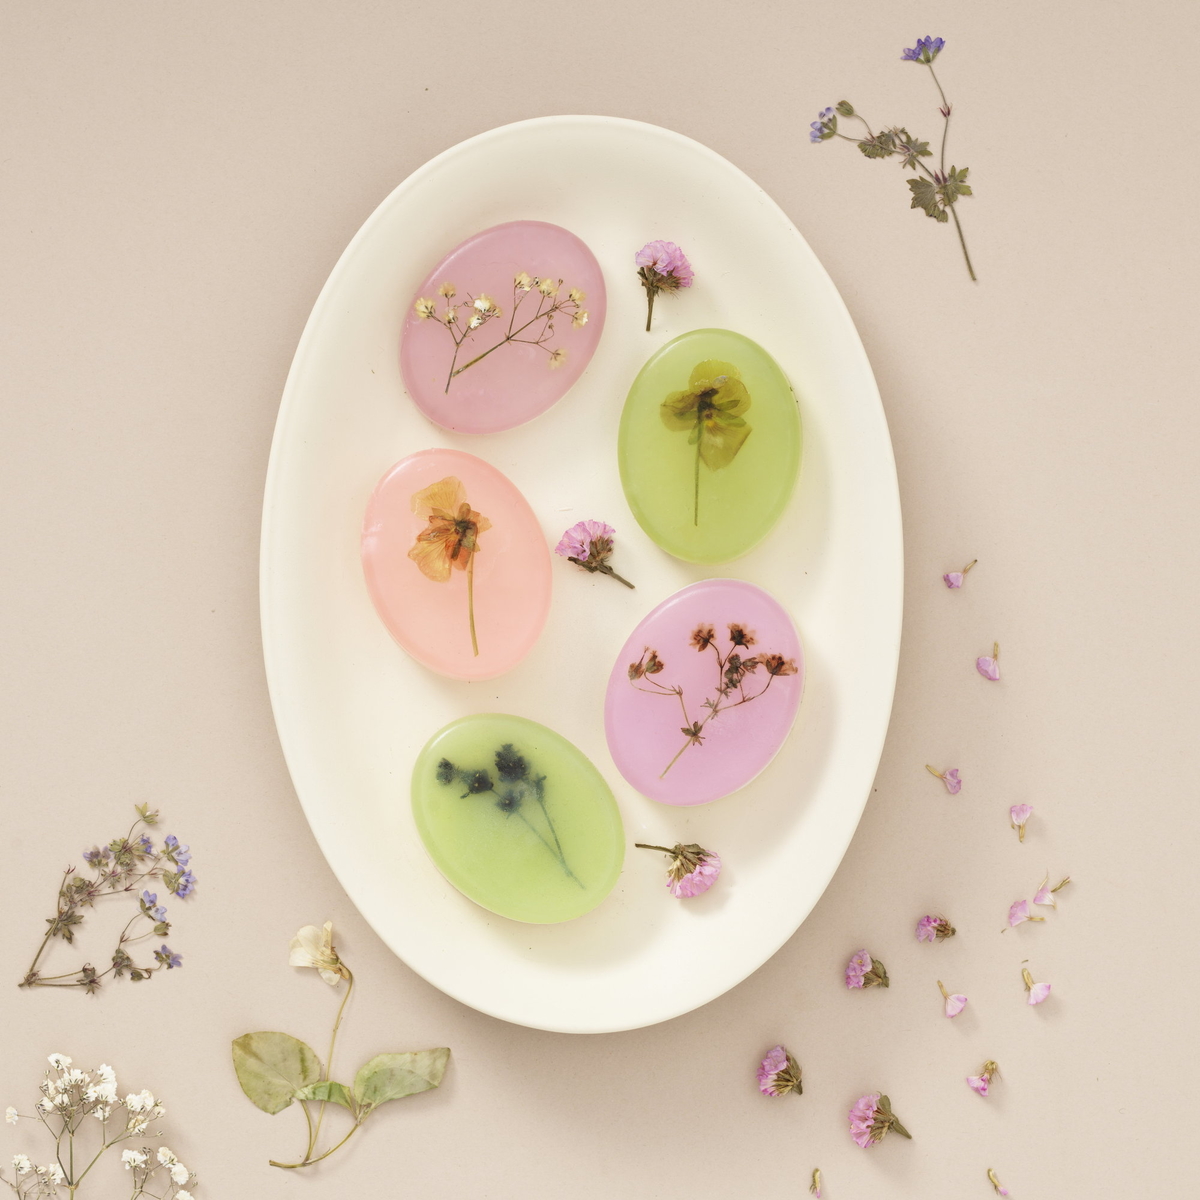 Decorate soap with dried flowers